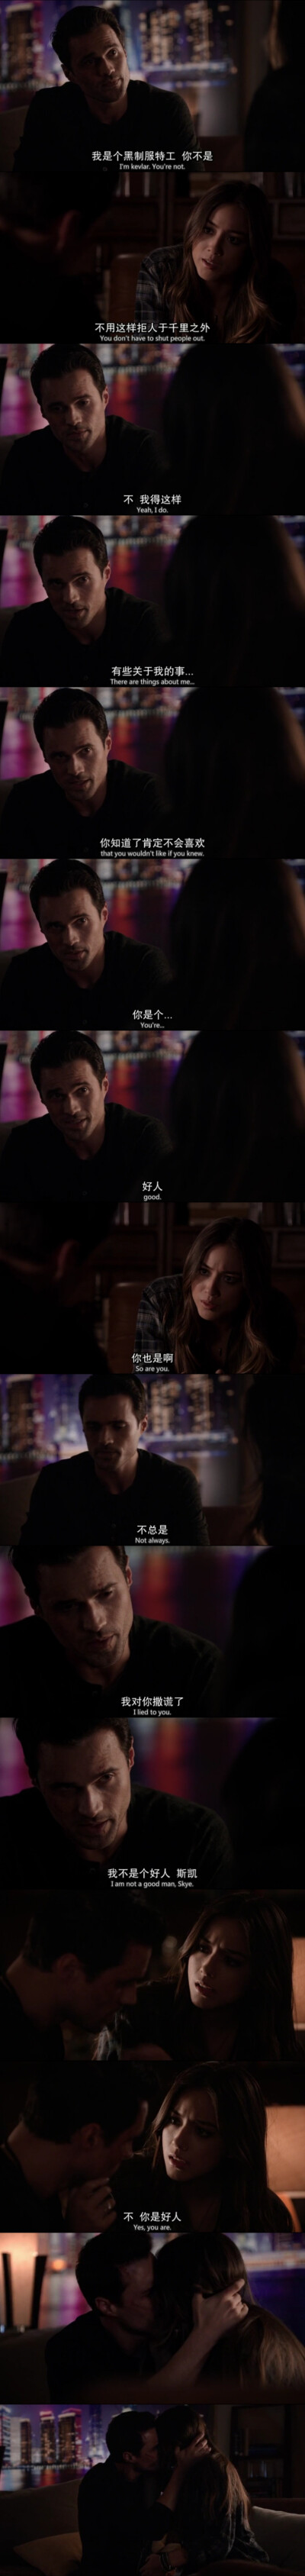 Agents of S.H.I.E.L.D——Skye and Ward